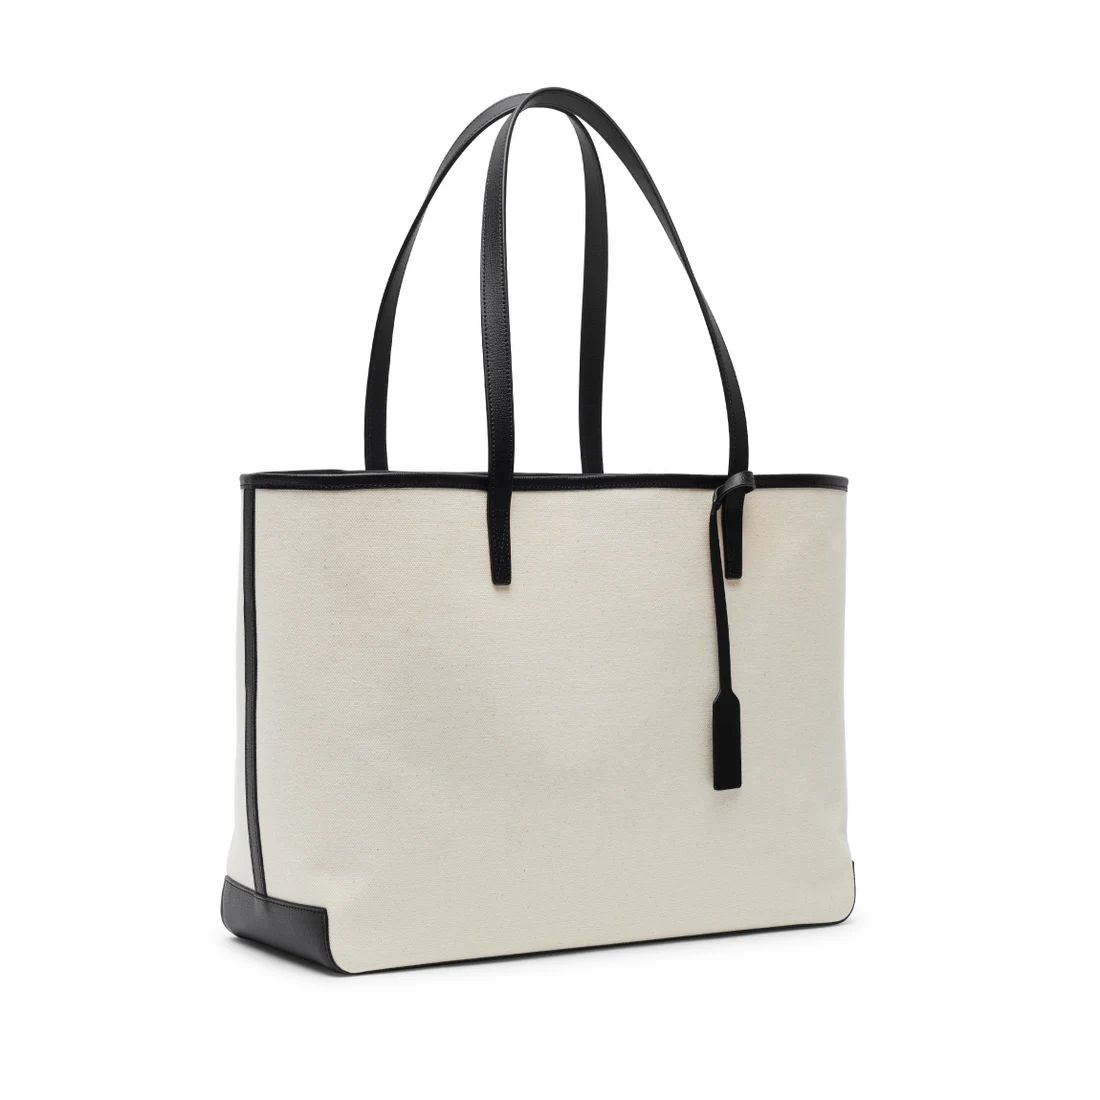 Belmont Tote in Canvas | Leatherology